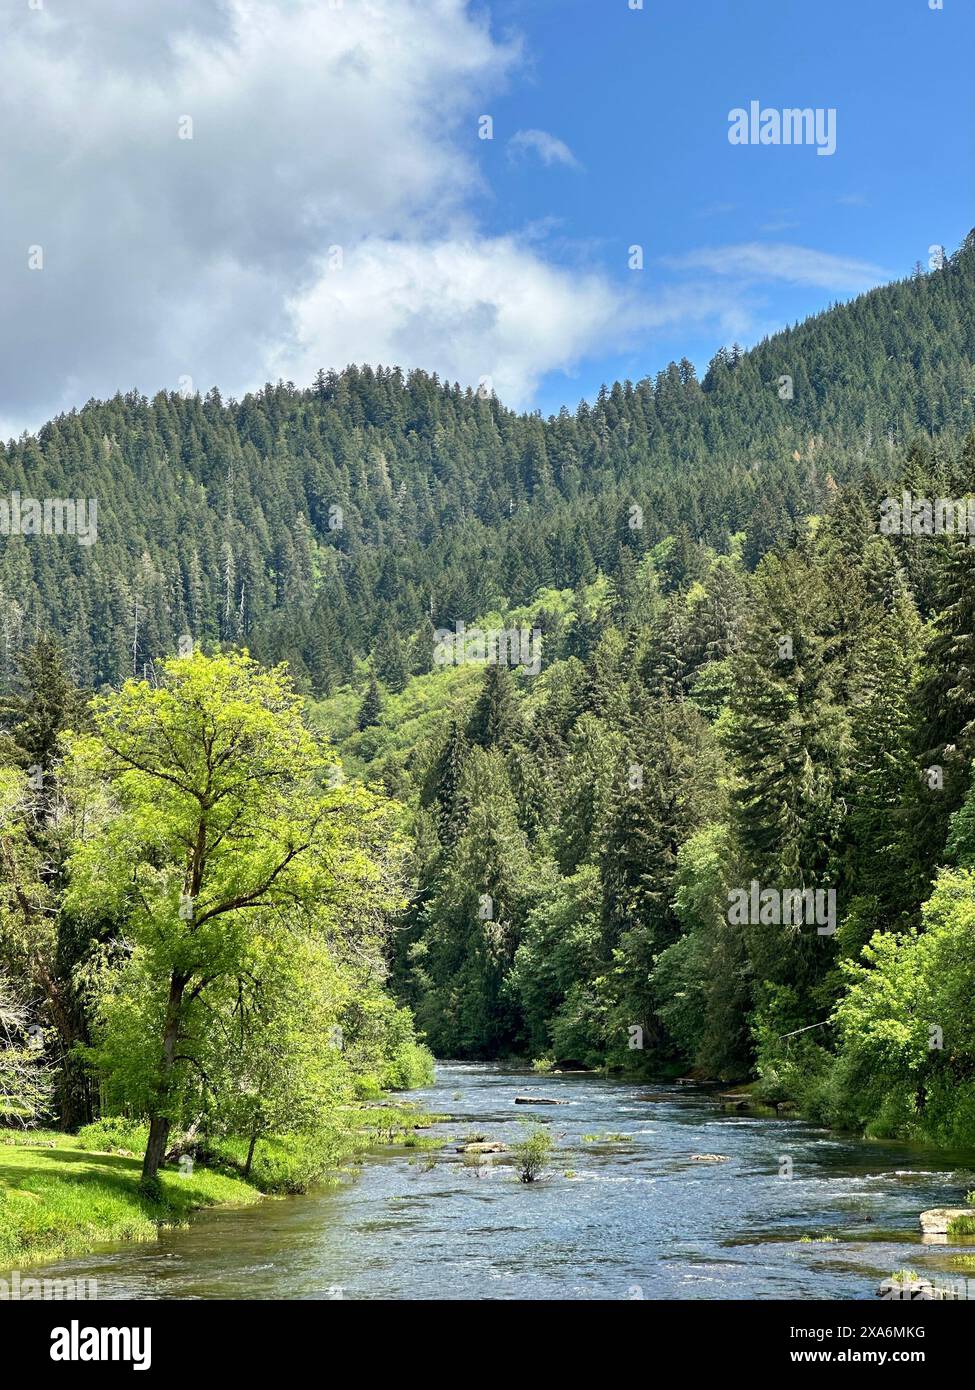 The calm waters of the Siuslaw River in Deadwood OR surrounded by dense green trees and a lush forest Stock Photo